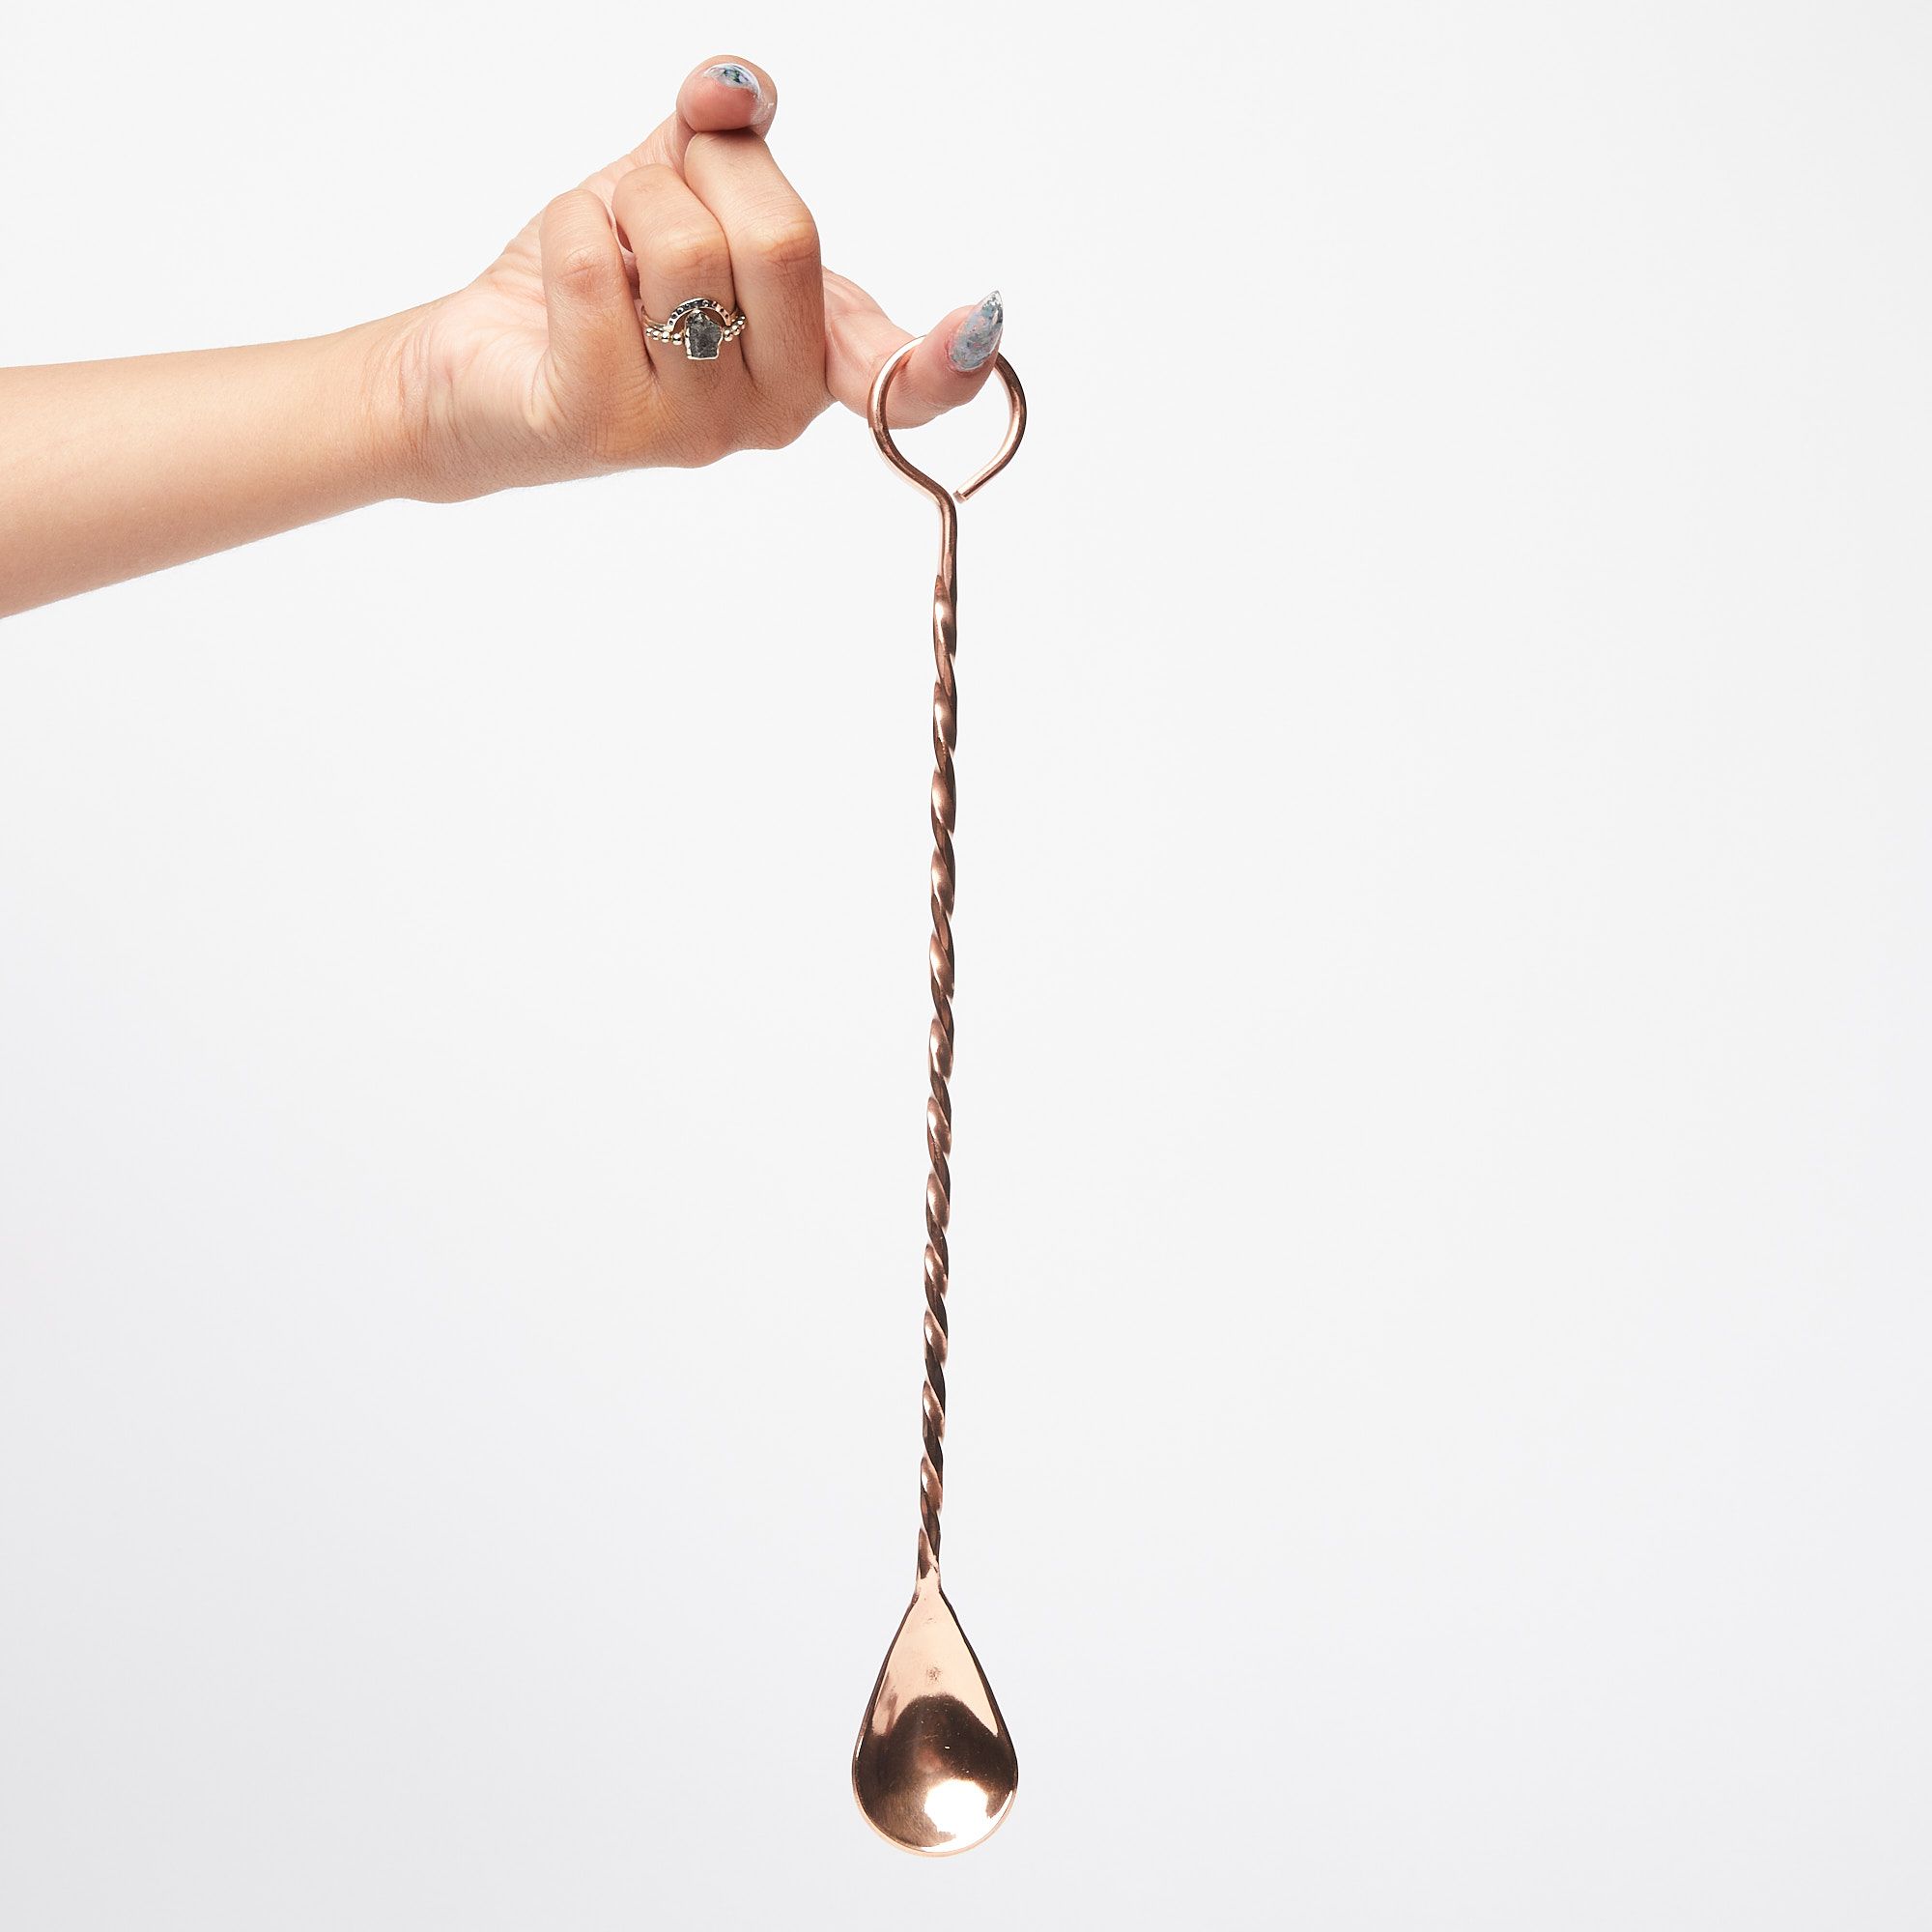 A hand with finger extended hilding long copper cocktail spoon with a twisted handle